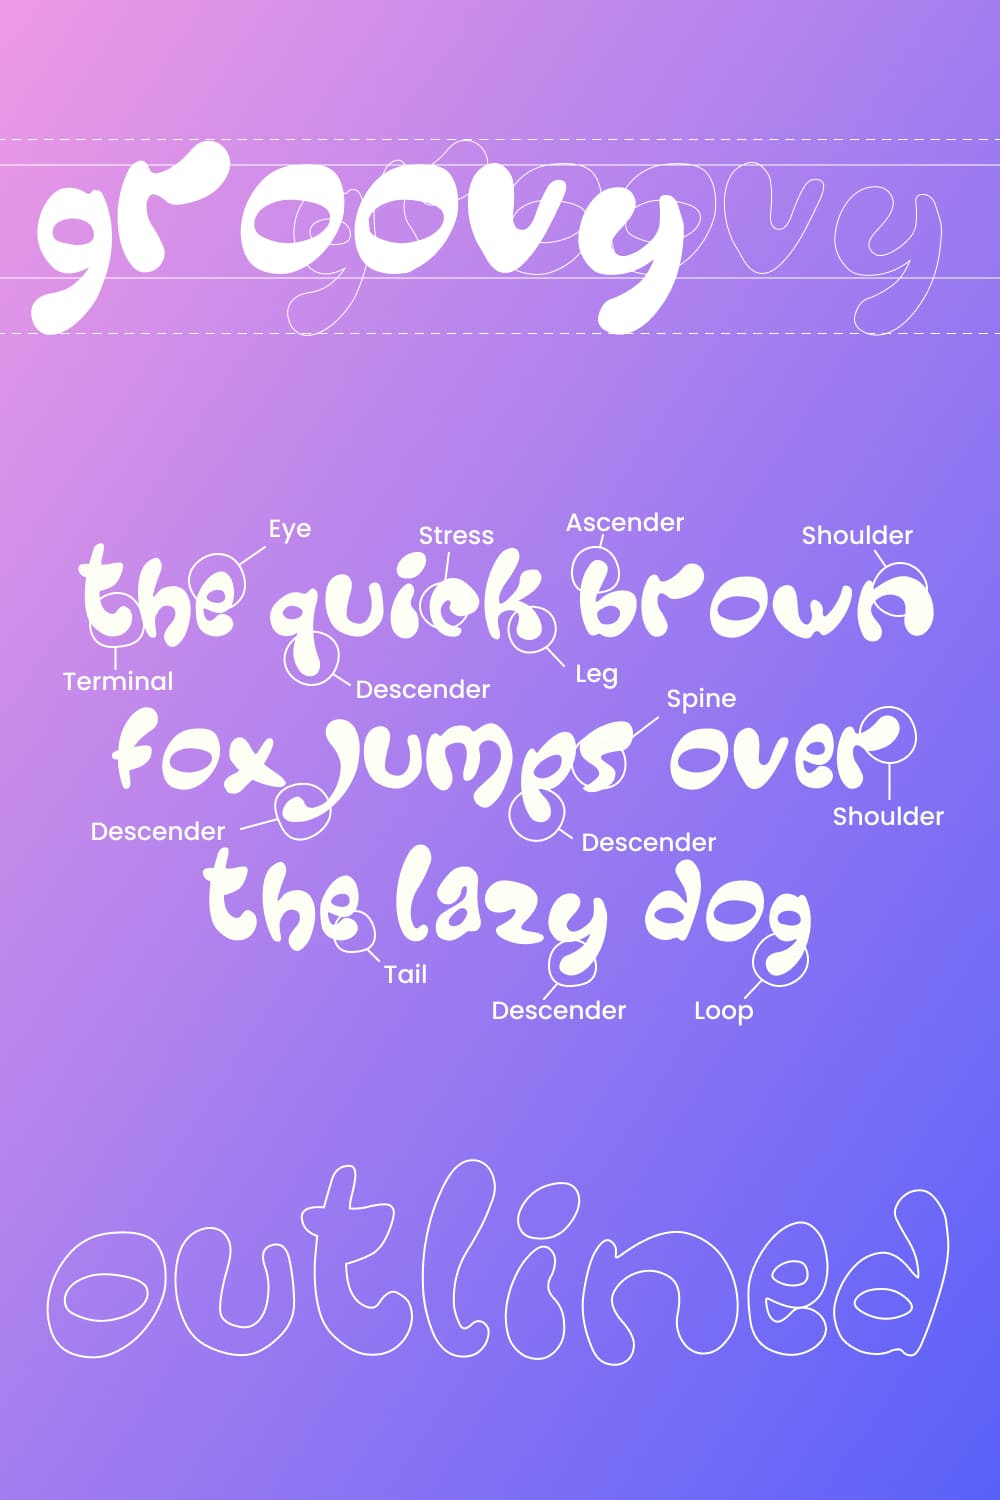 The font has different styles that are displayed in this image.